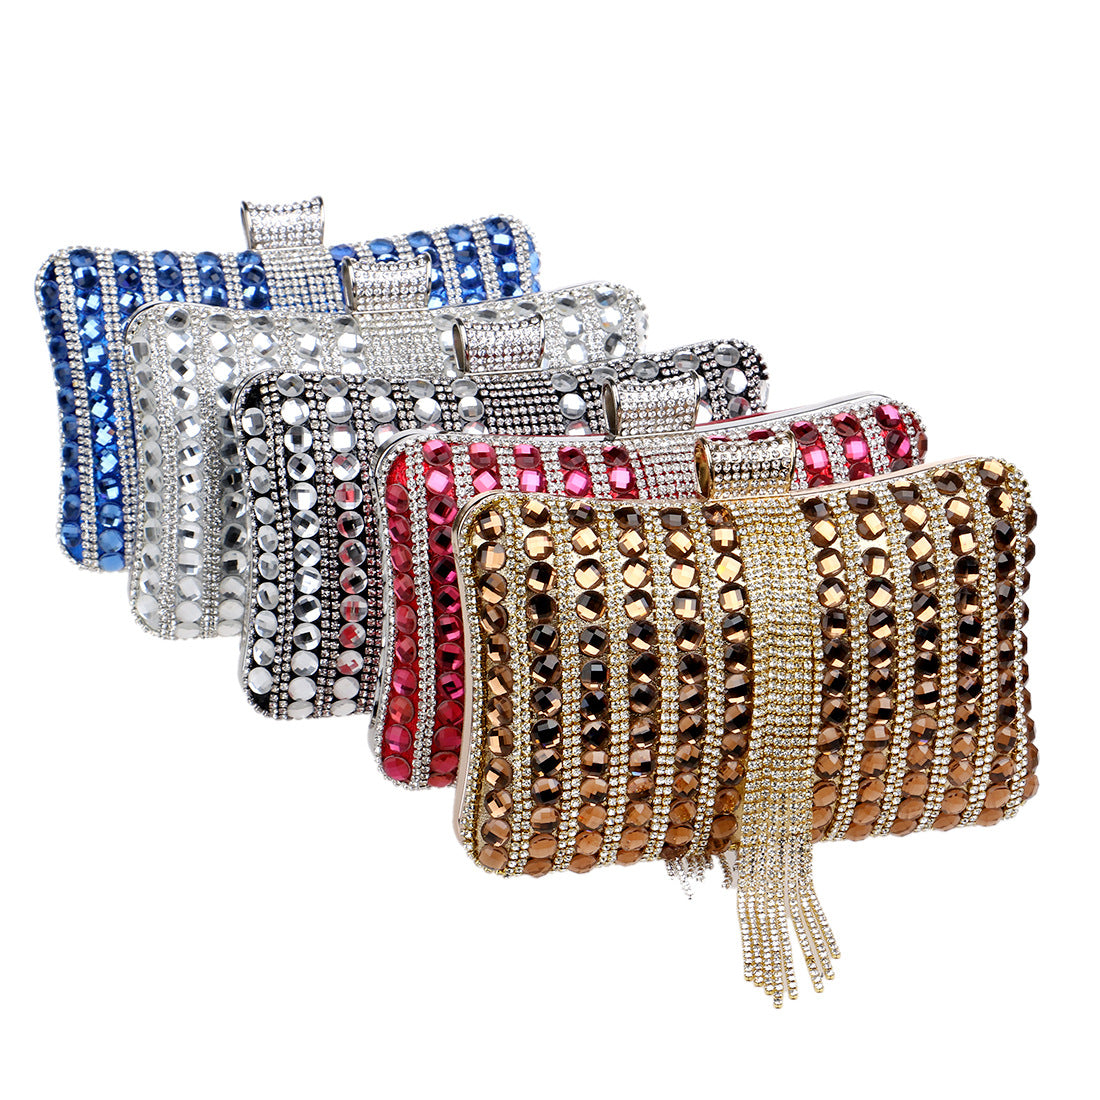 Fringed Evening Clutch Bag - The Trend